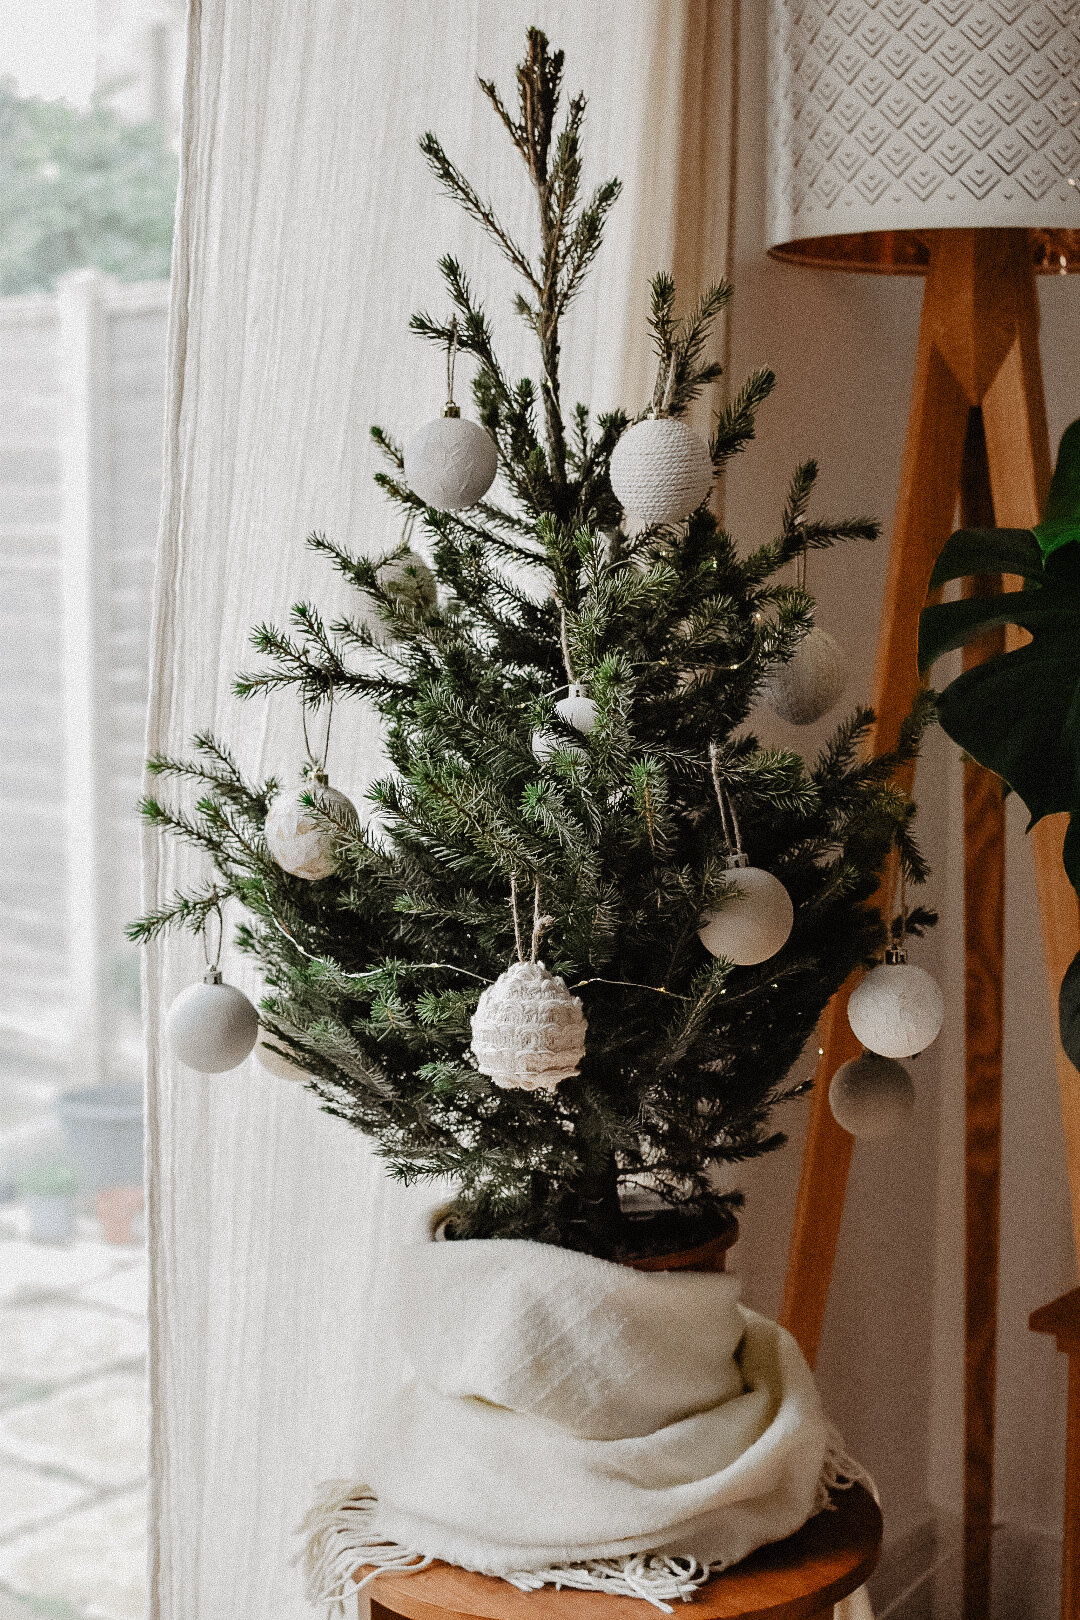 3 Upcycled Christmas Decorations Using Recycled Materials | aboderie